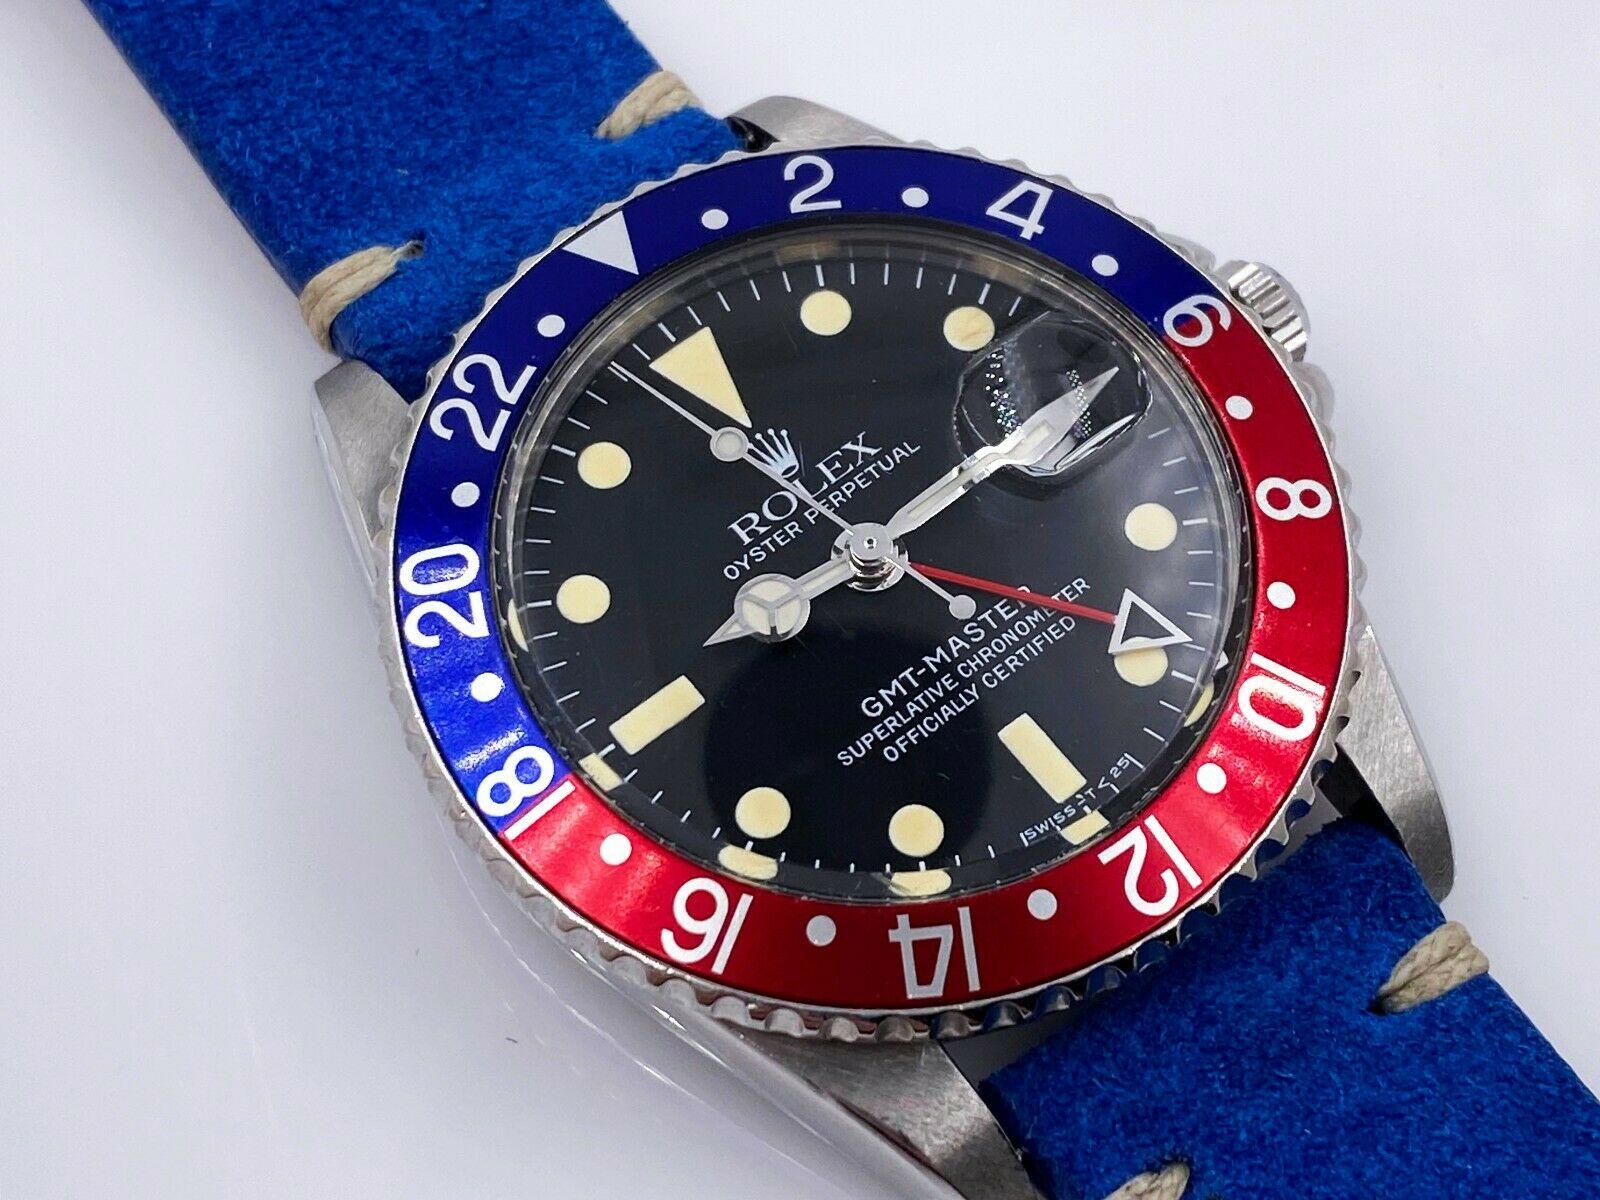 Style Number: 1675

 

Serial: 623***


Year: 1960

 

Model: GMT Master

 

Case Material: Stainless Steel

 

Band: Custom Blue Suede Leather Band 

 

Bezel:  Pepsi- Red and Blue 

 

Dial: Black 

 

Face: Acrylic 

 

Case Size: 40mm

